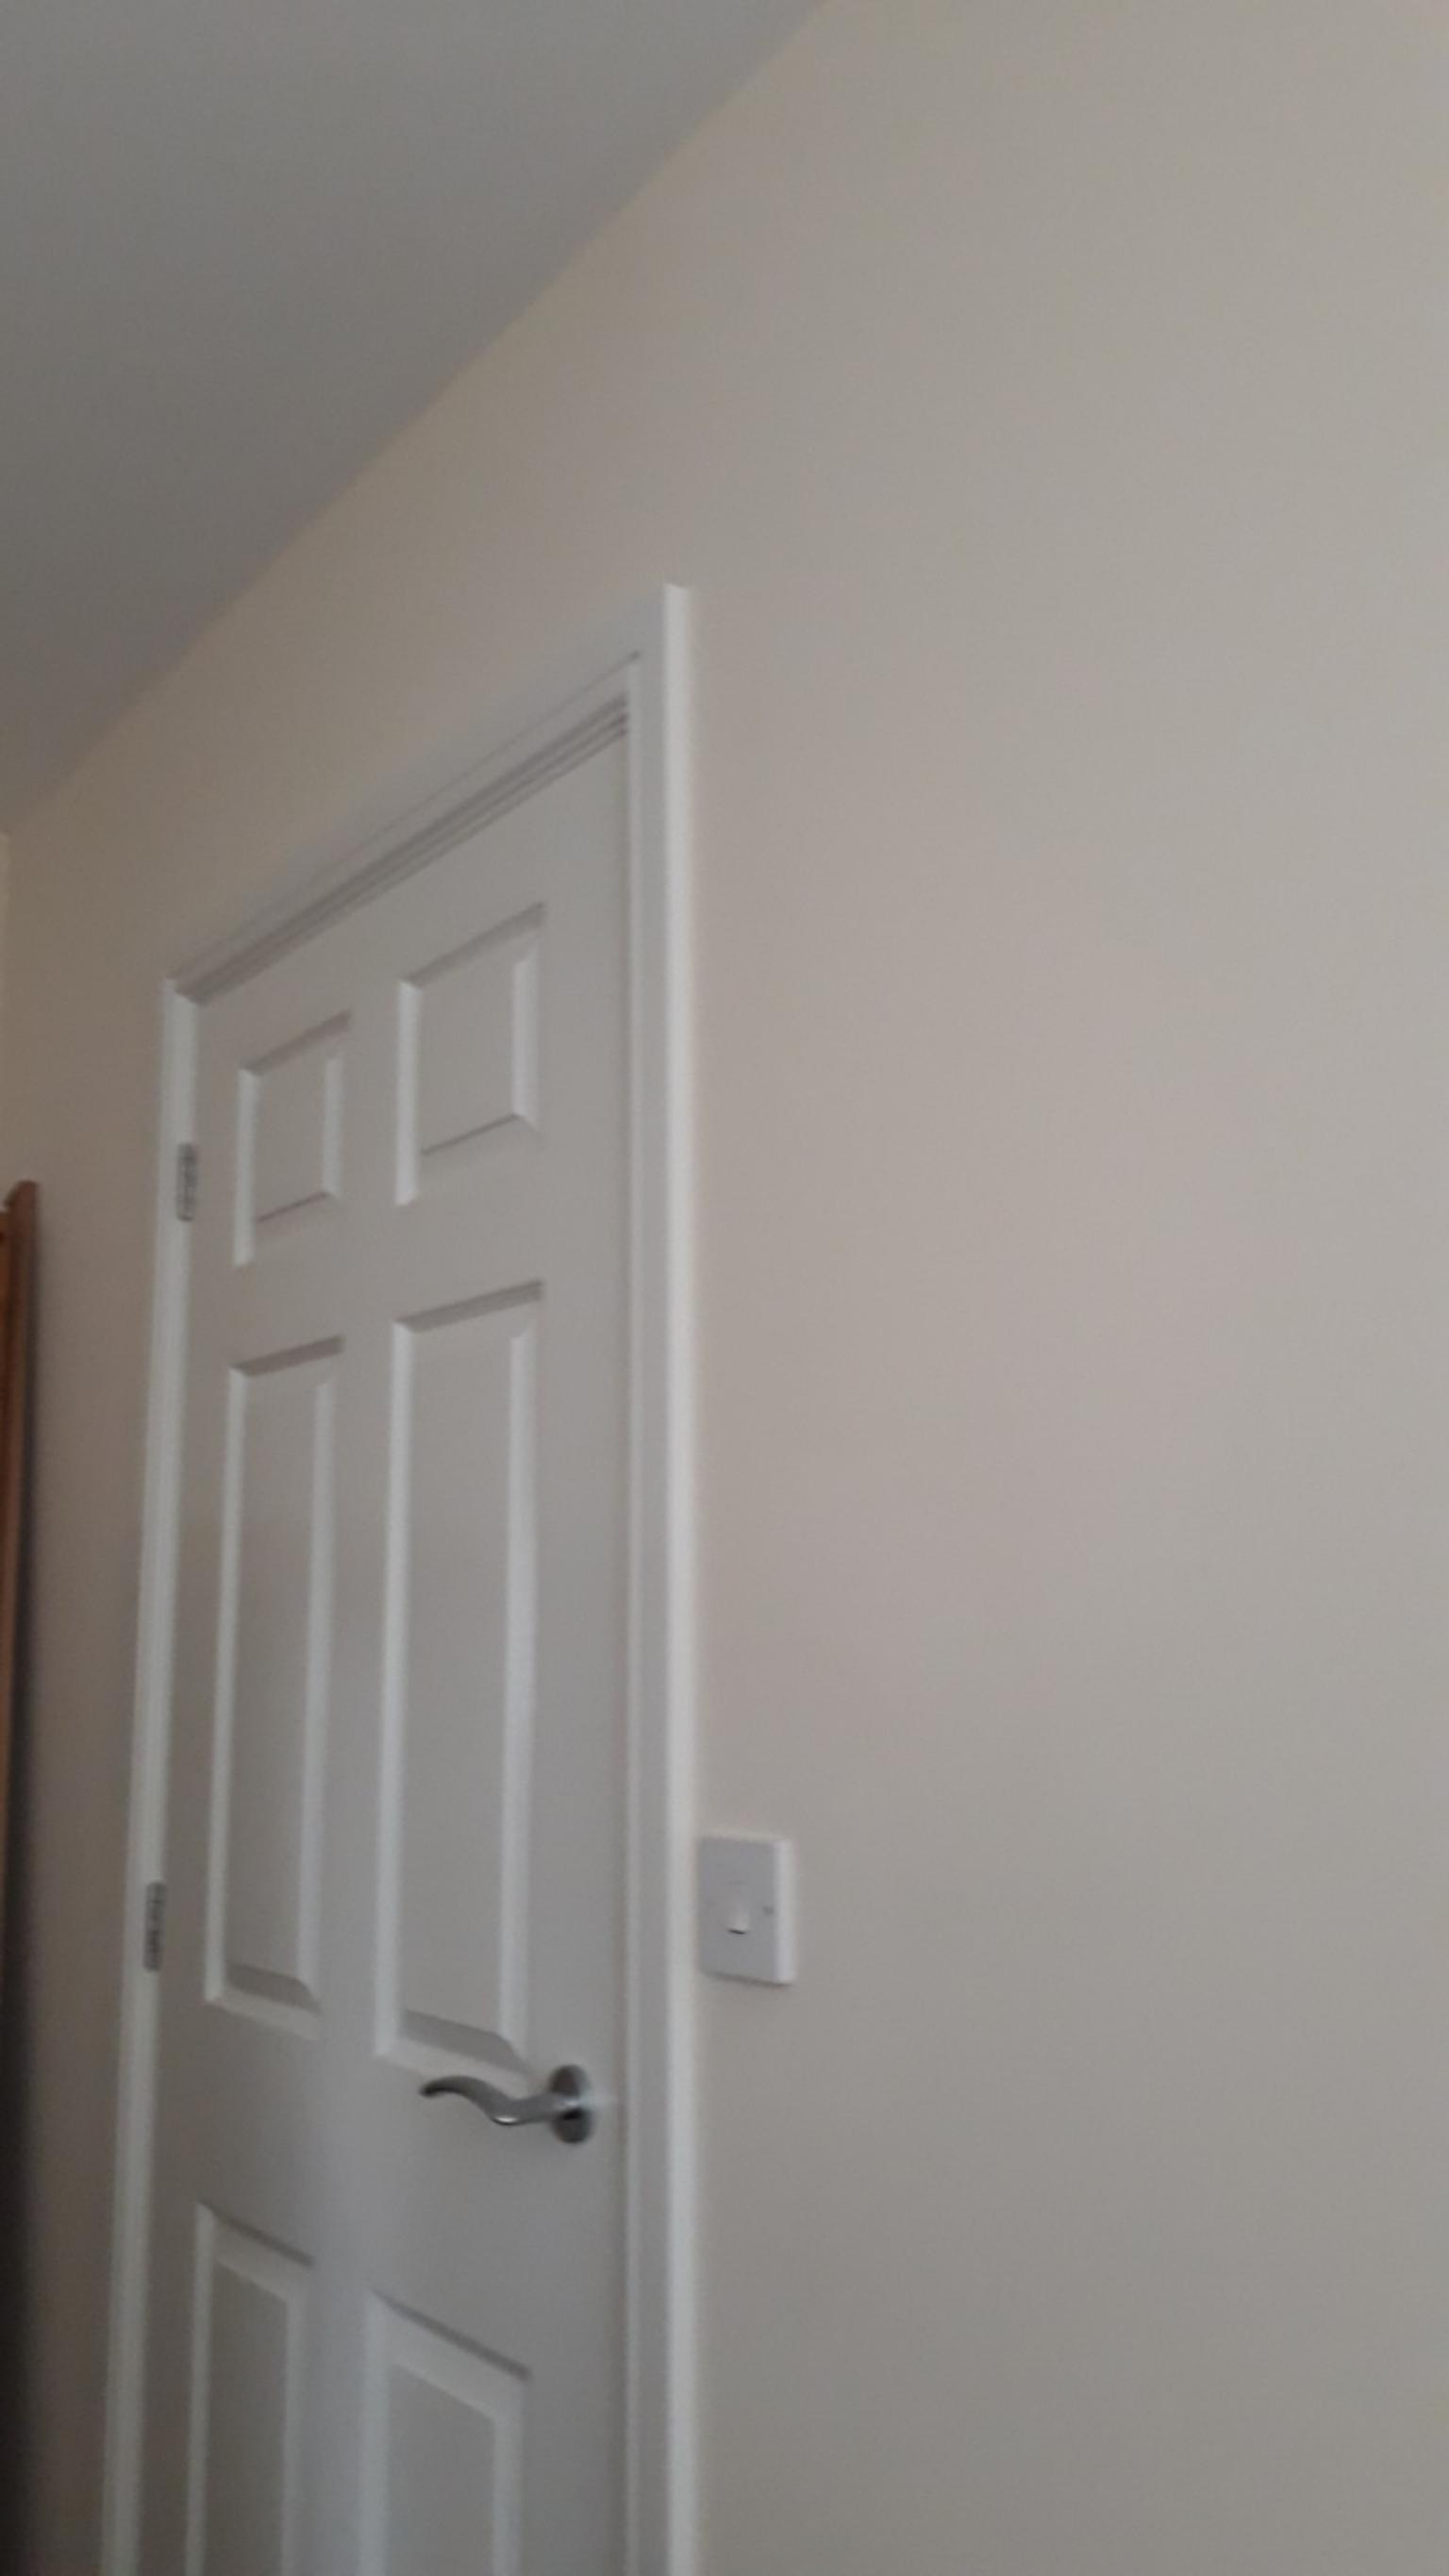 Interior Doors X 3 In Tf2 Oakengates For 20 00 For Sale Shpock